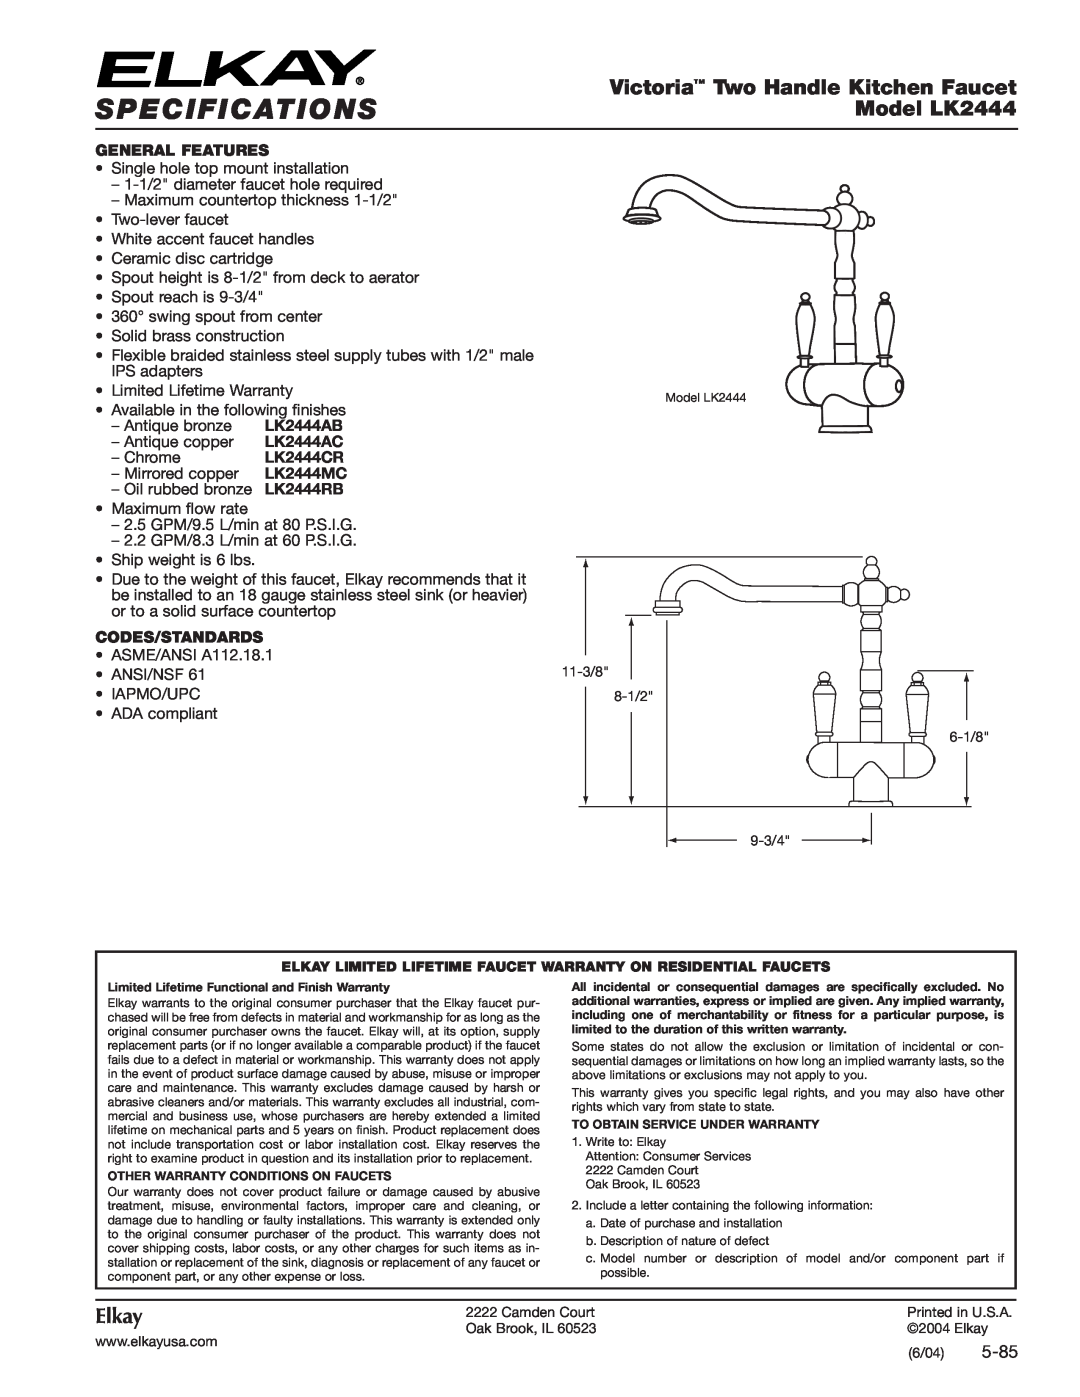 Elkay LK2444AC specifications Specifications, Victoria Two Handle Kitchen Faucet, Model LK2444, Elkay, 5-85, LK2444AB 